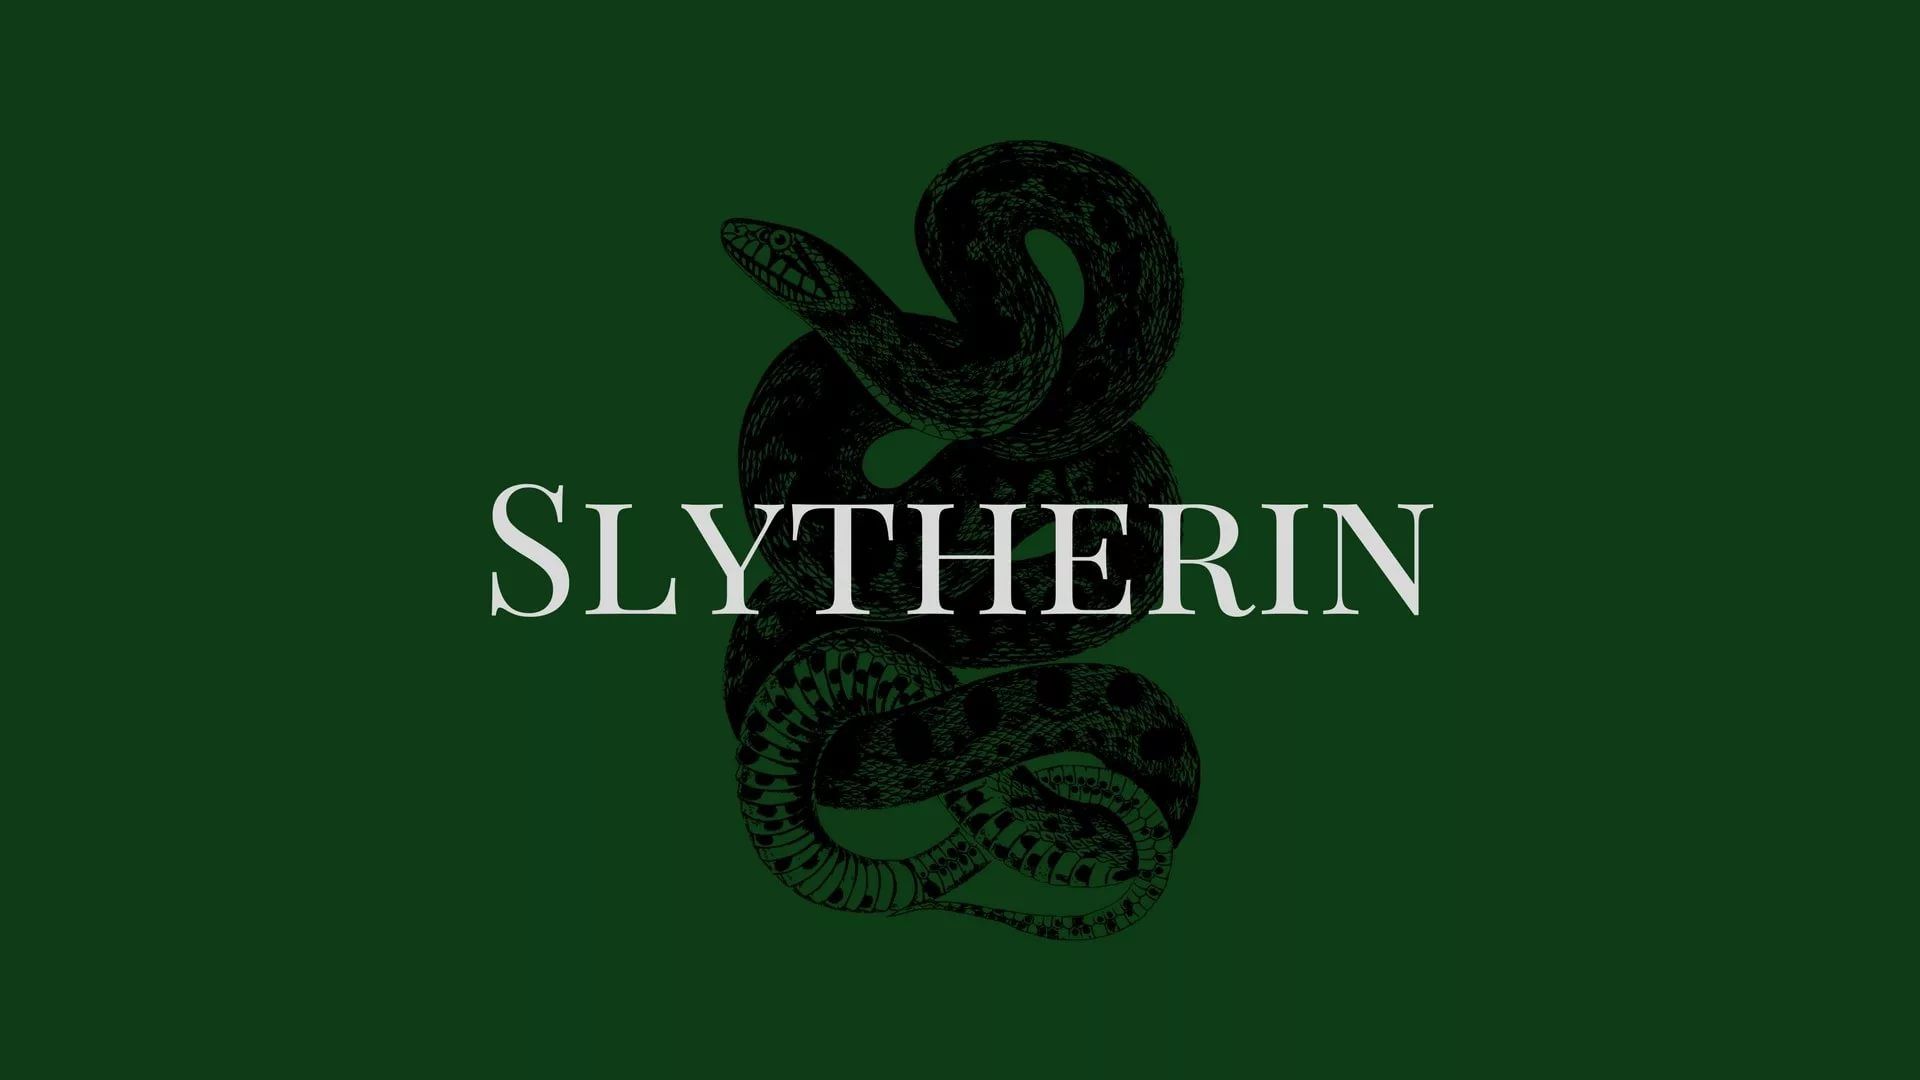 Slytherin download free wallpapers for pc in hd